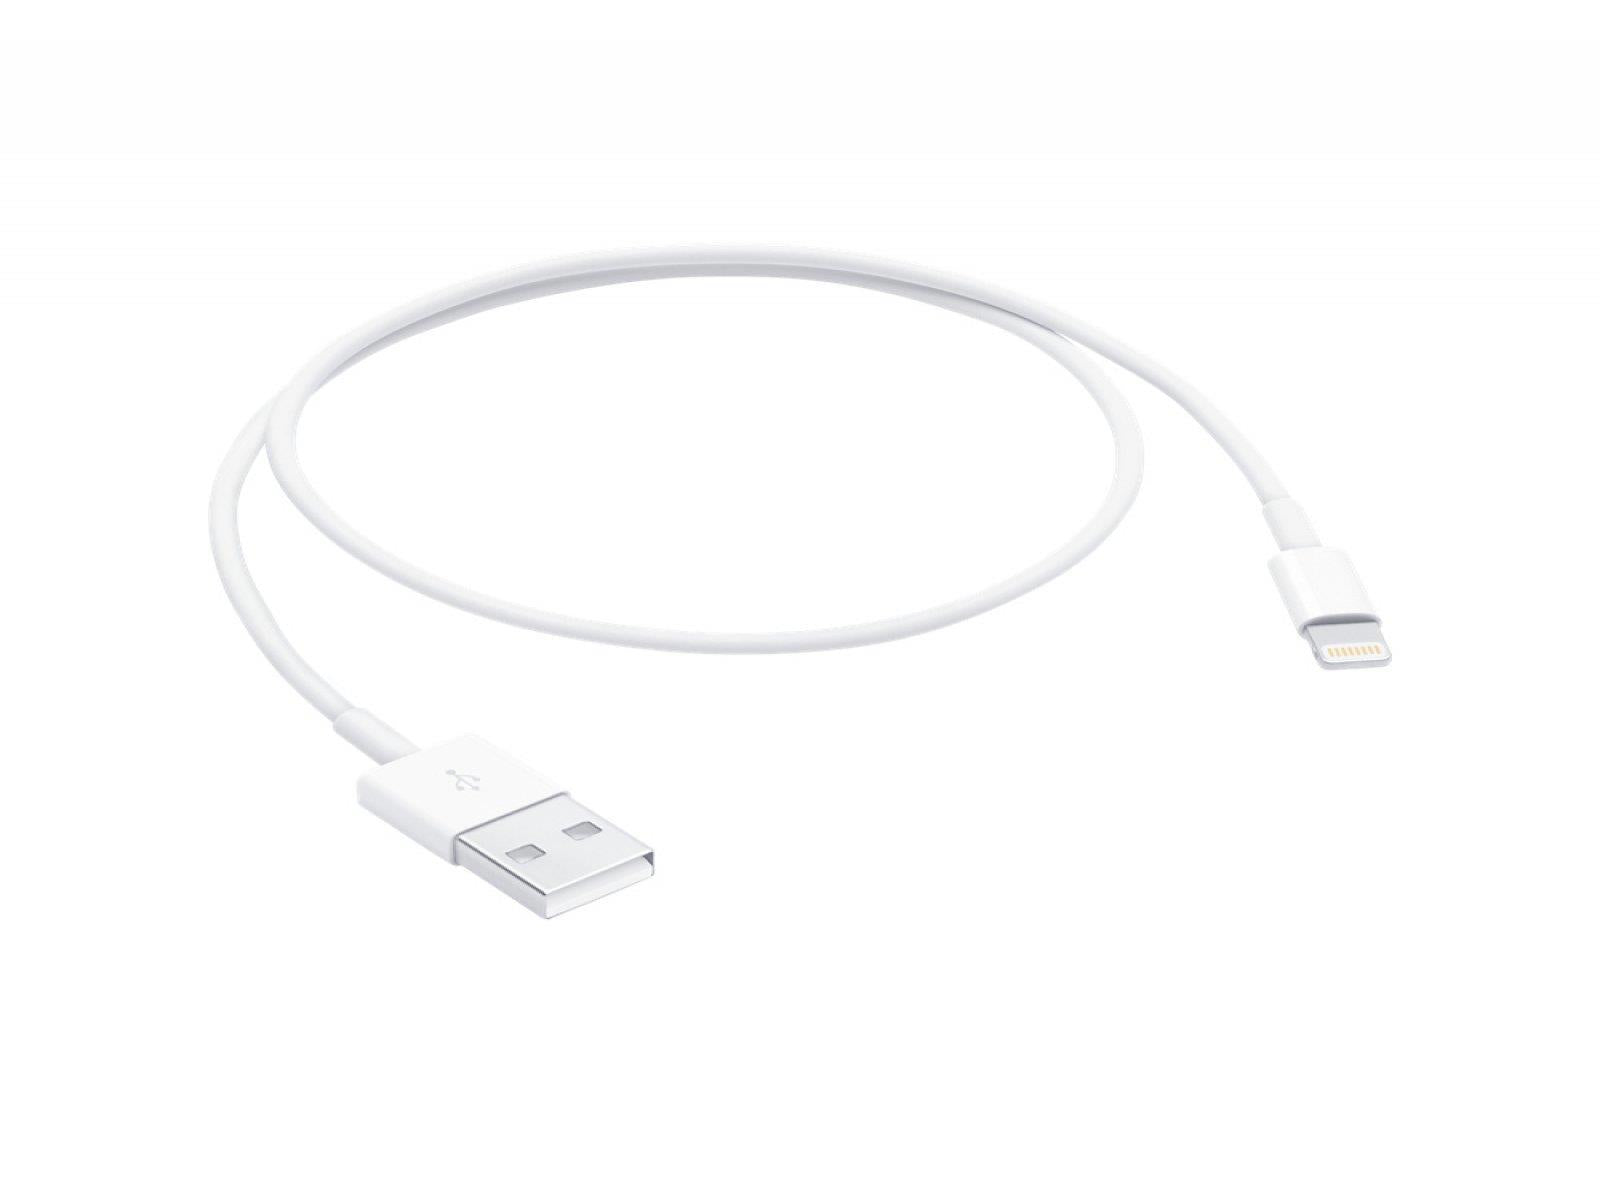 Apple Lighting Cable Showing Short Length 